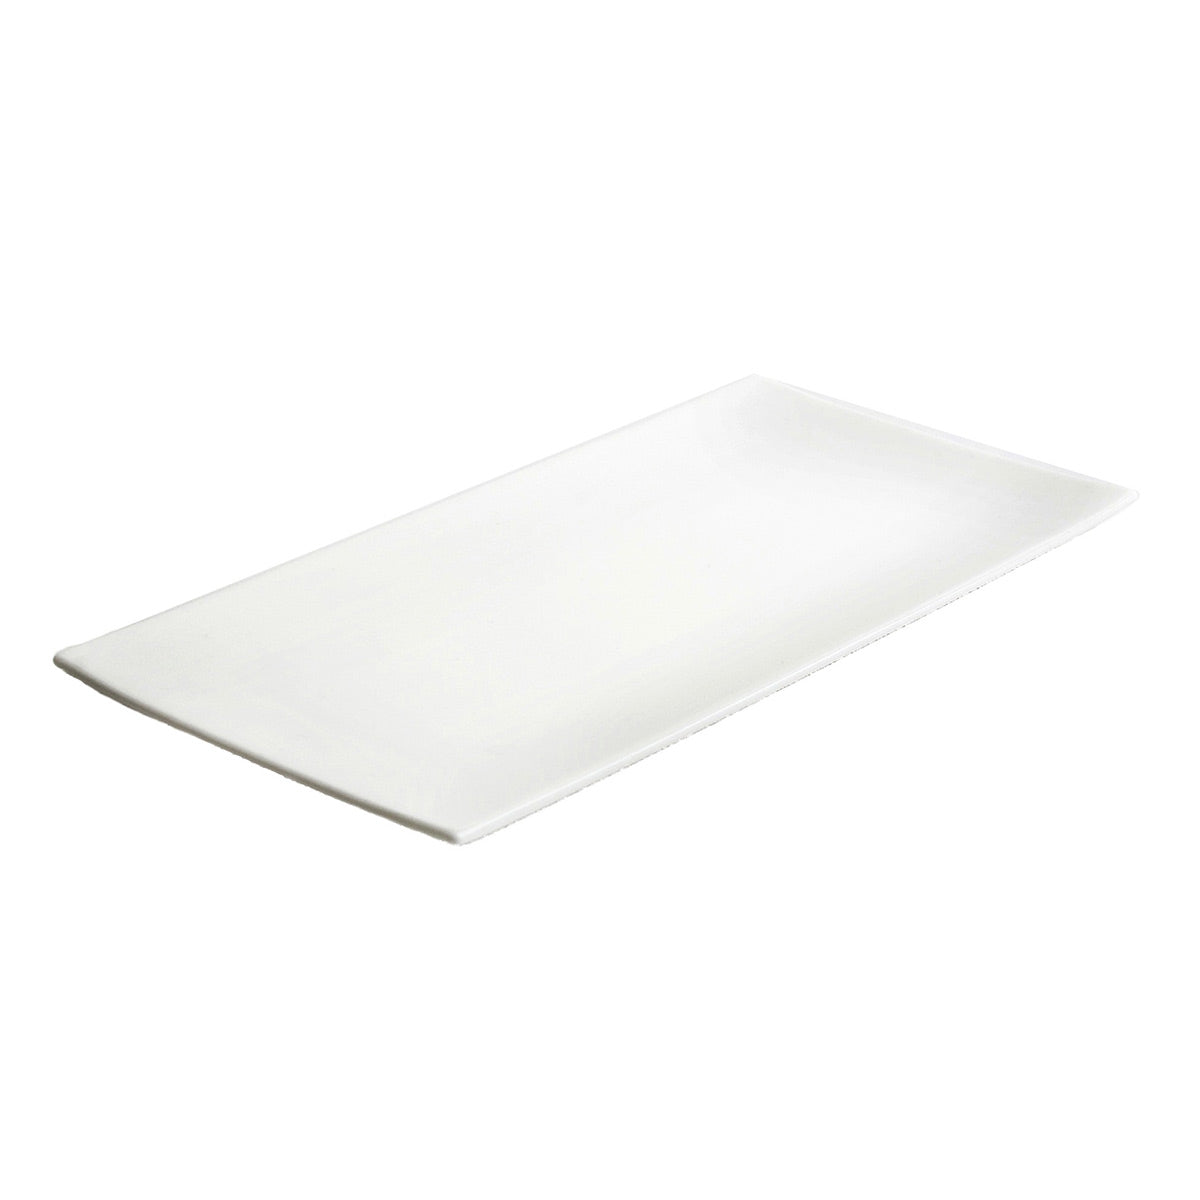 A Table Rectangular Occasion Plate Large